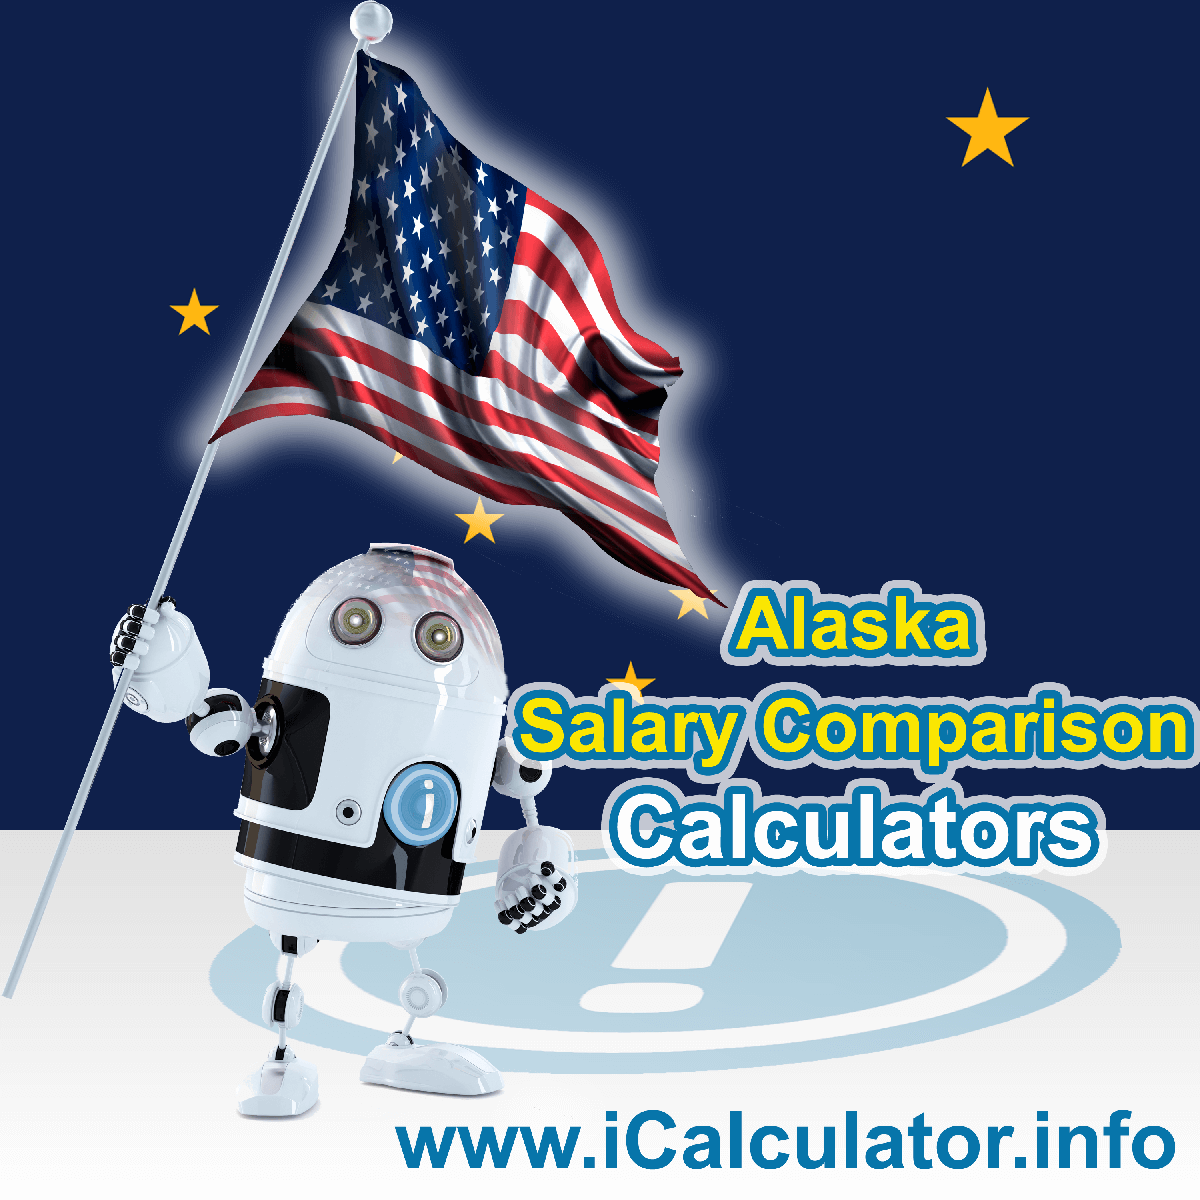 Alaska Salary Comparison Calculator 2022 | iCalculator™ | The Alaska Salary Comparison Calculator allows you to quickly calculate and compare upto 6 salaries in Alaska or compare with other states for the 2022 tax year and historical tax years. 